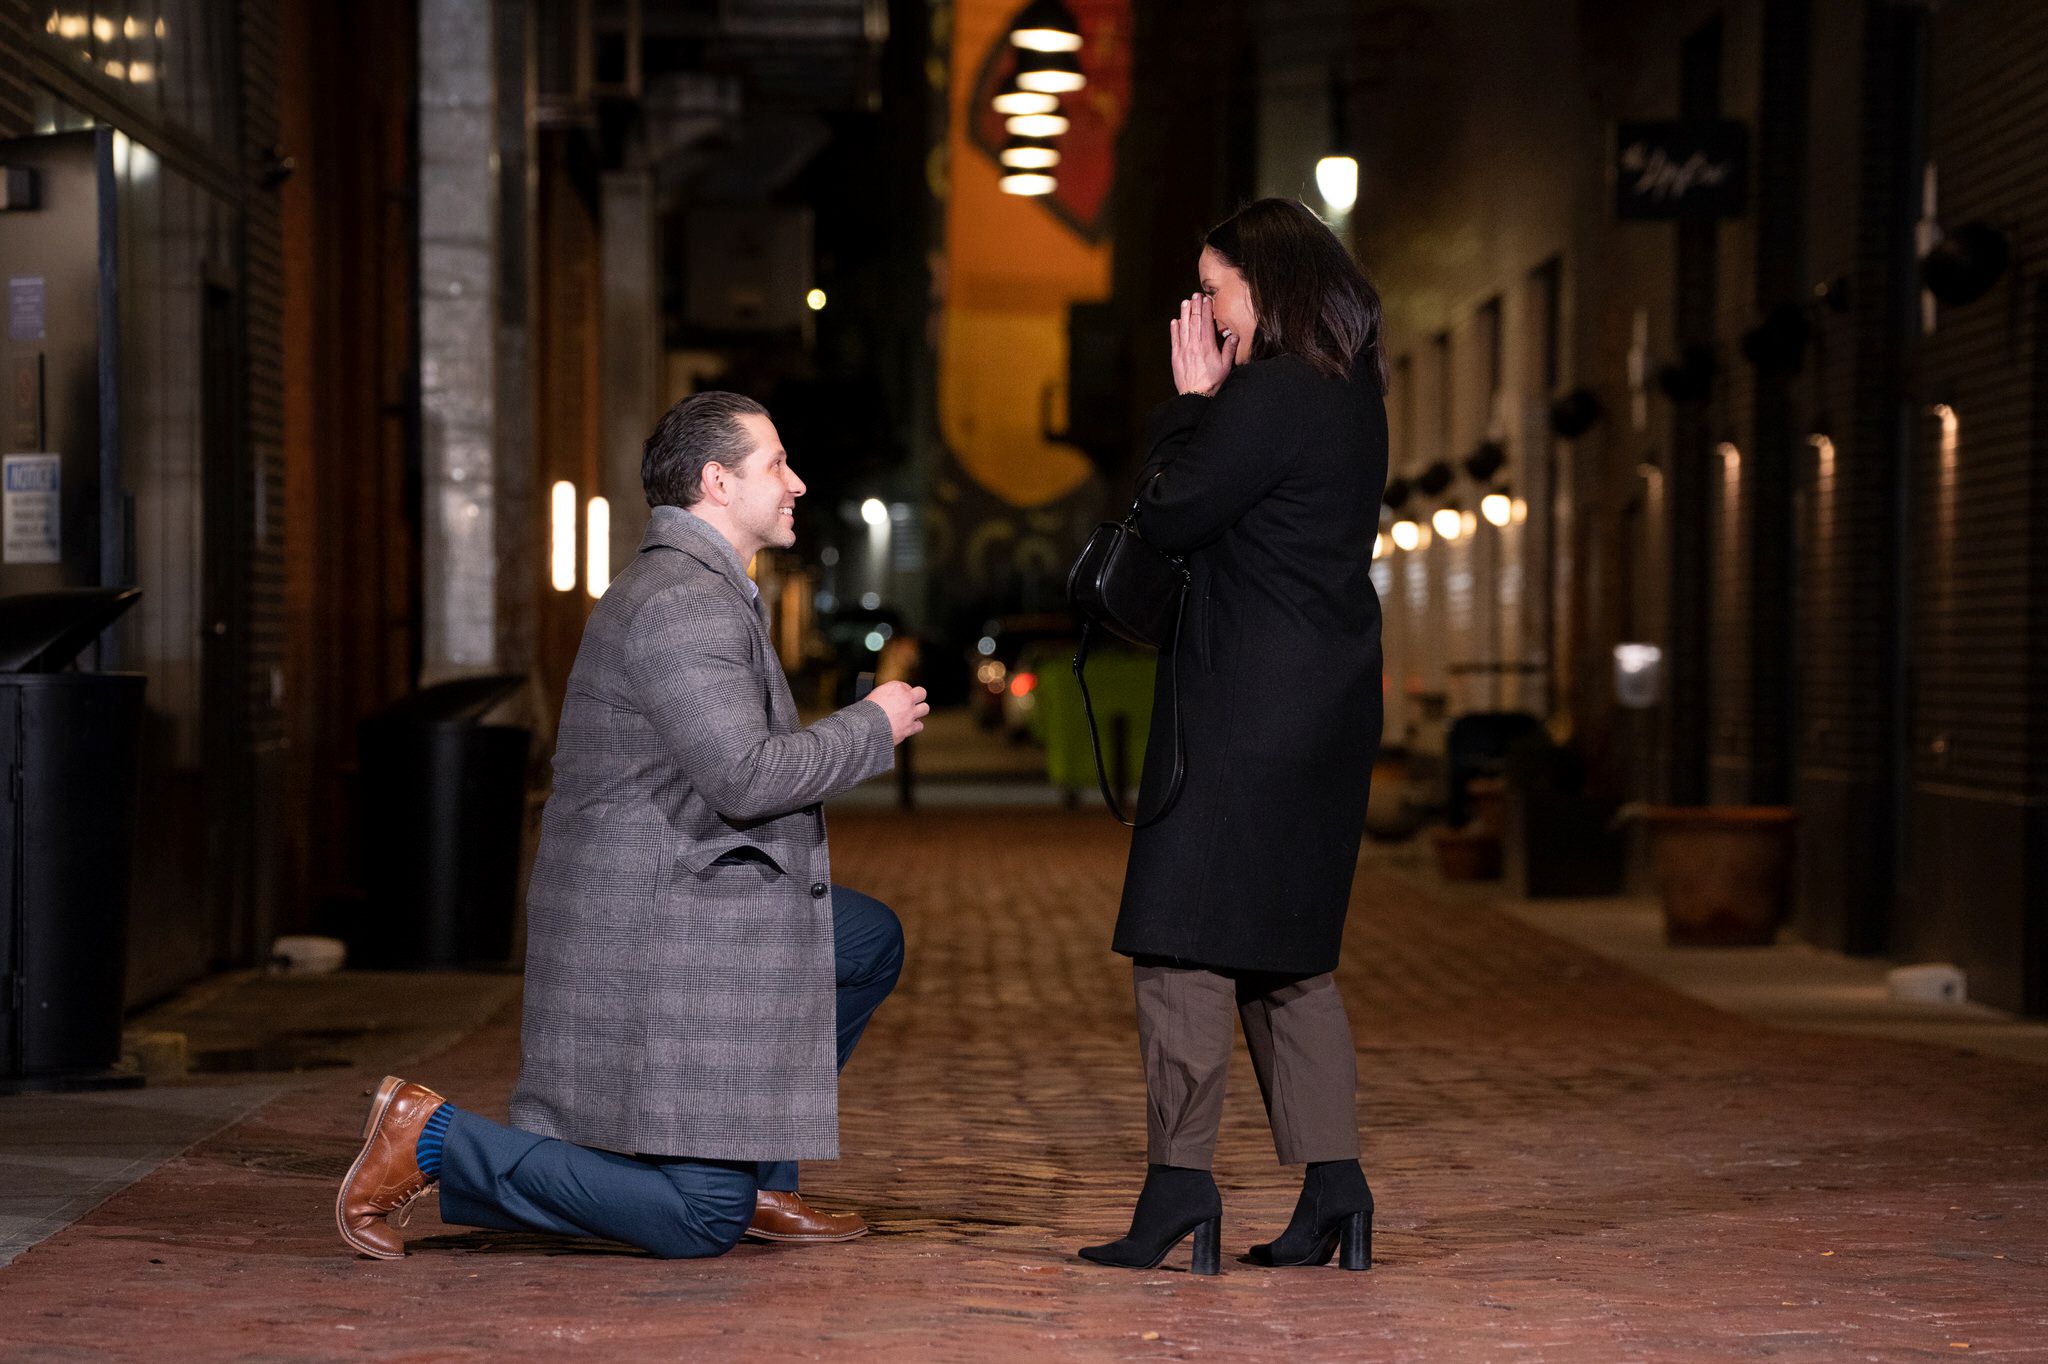 A woman reacts during a proposal in Parker's Alley in Detroit.  